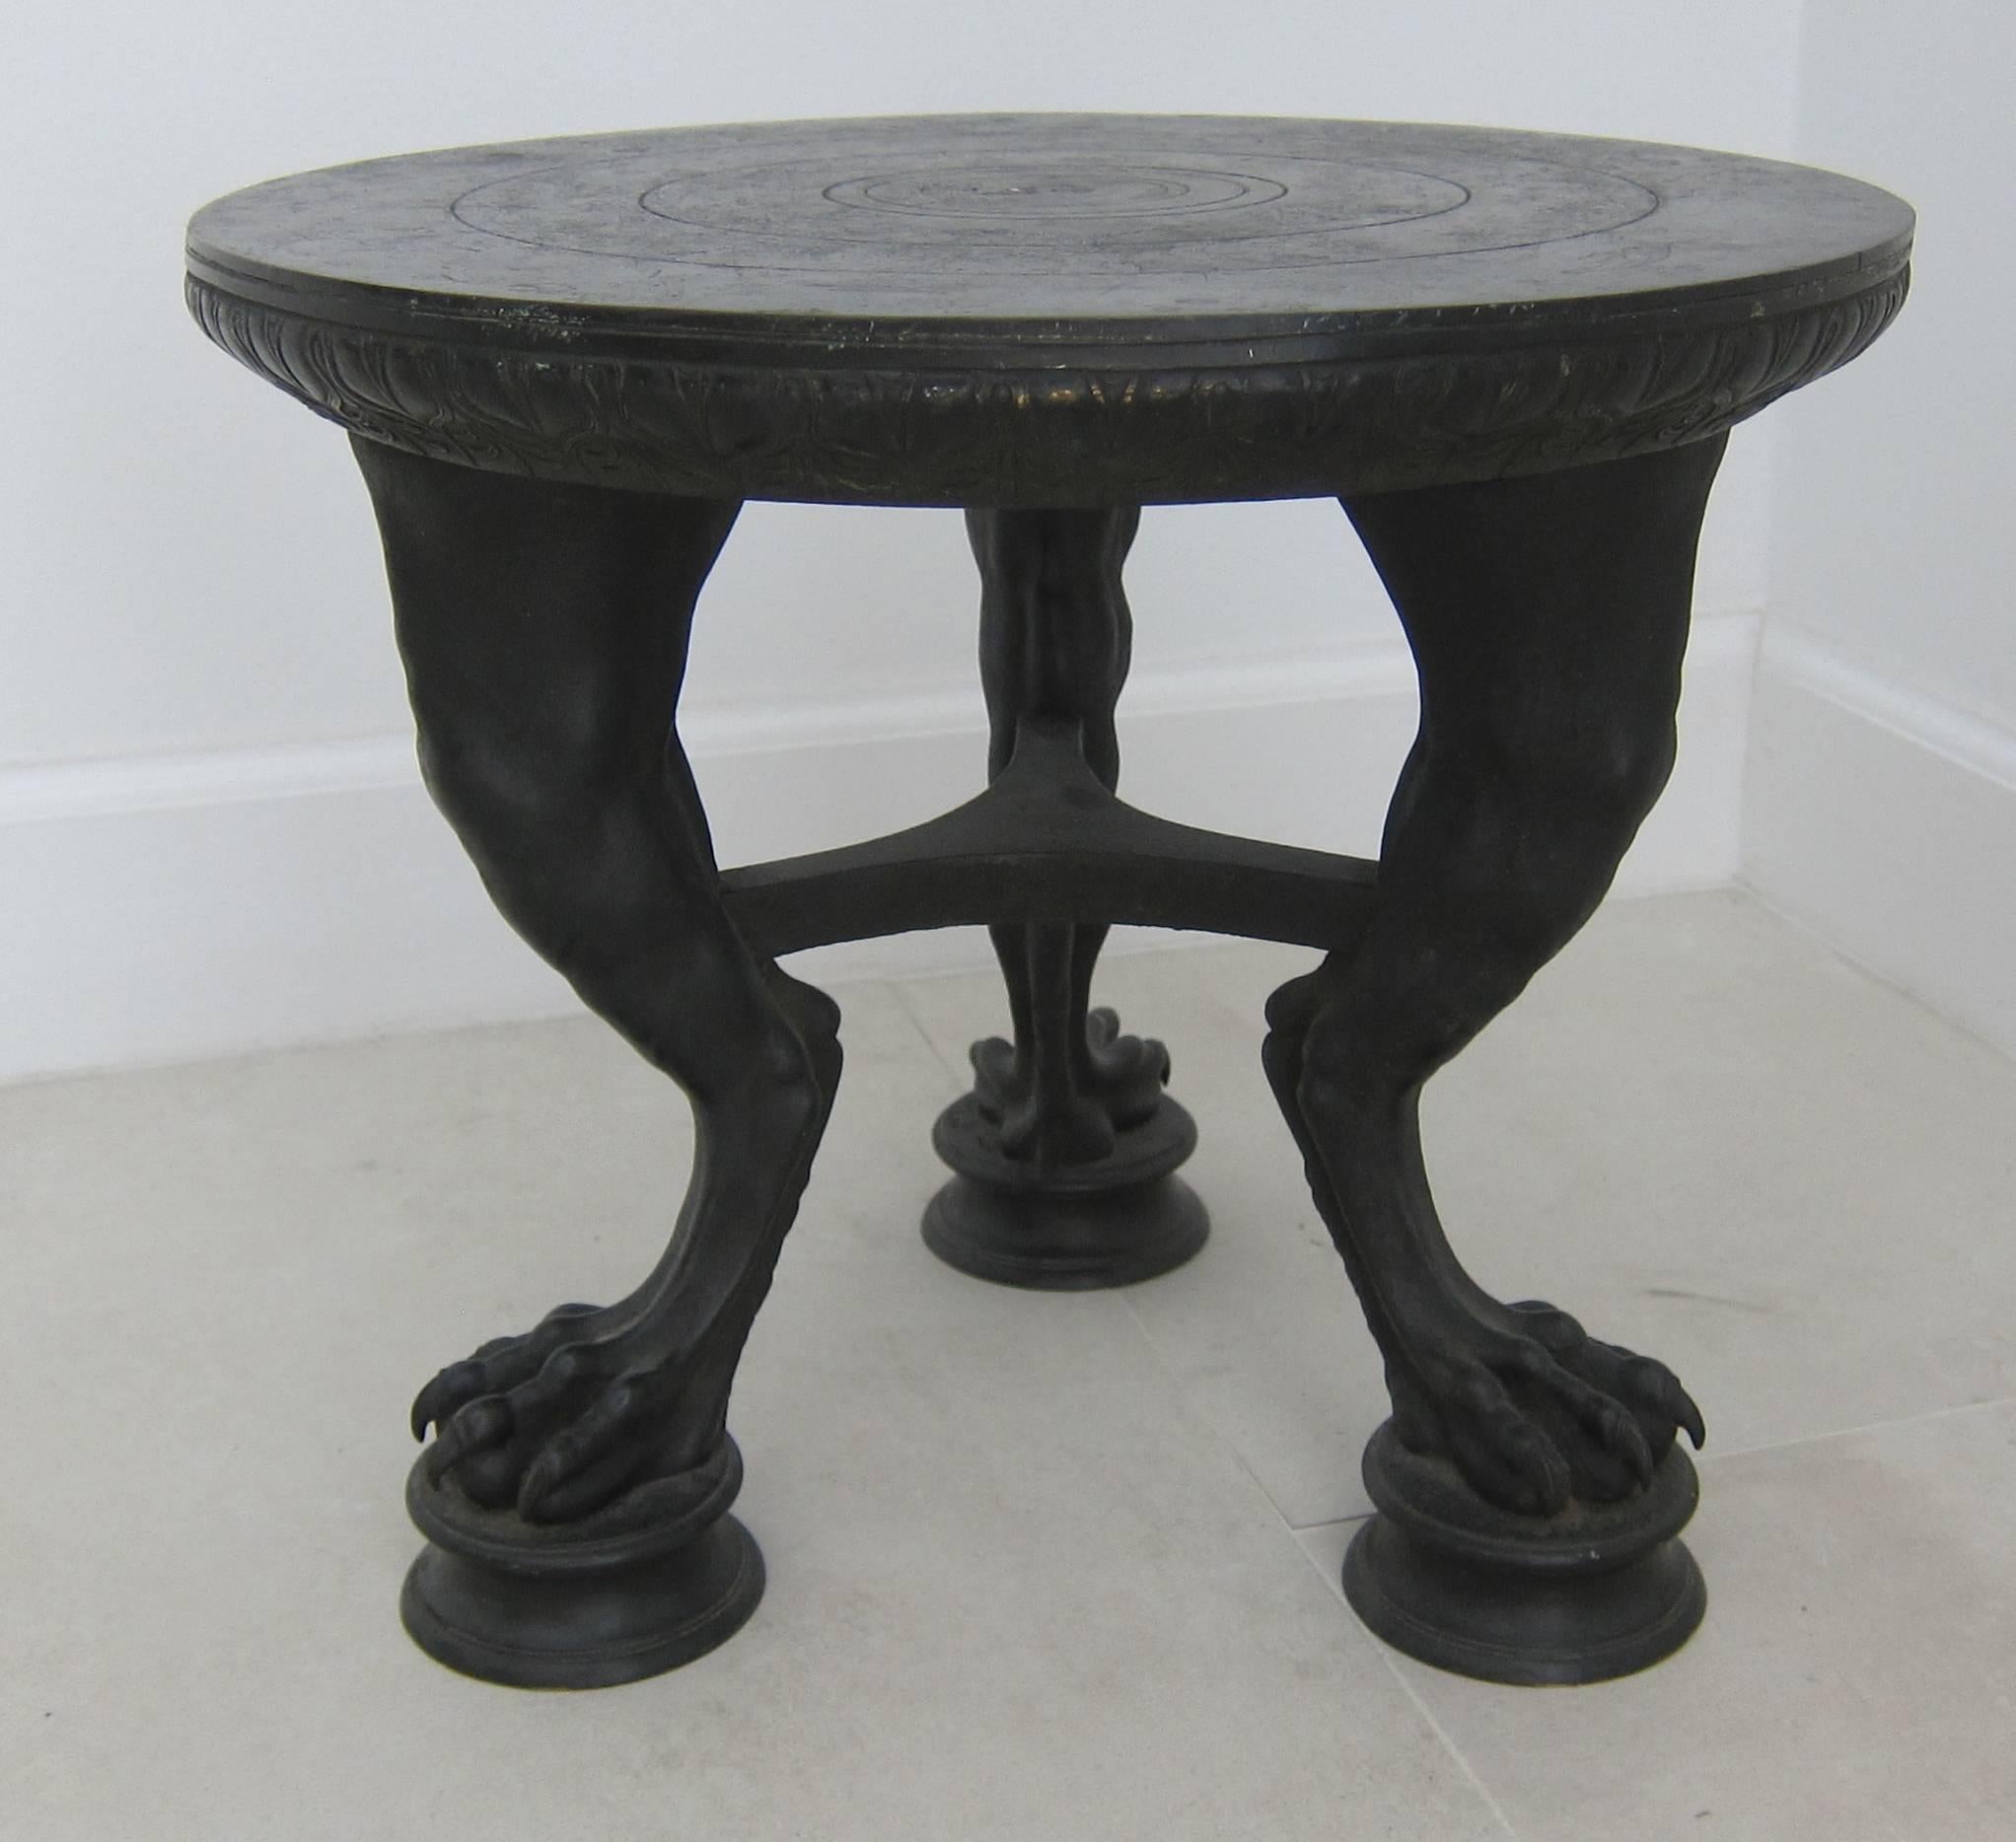 Rare  Etruscan style bronze tripod stand or table by Sabatino De Angelis and Fils, Italy, late 19th century.
Please see similar higher version we have listed.